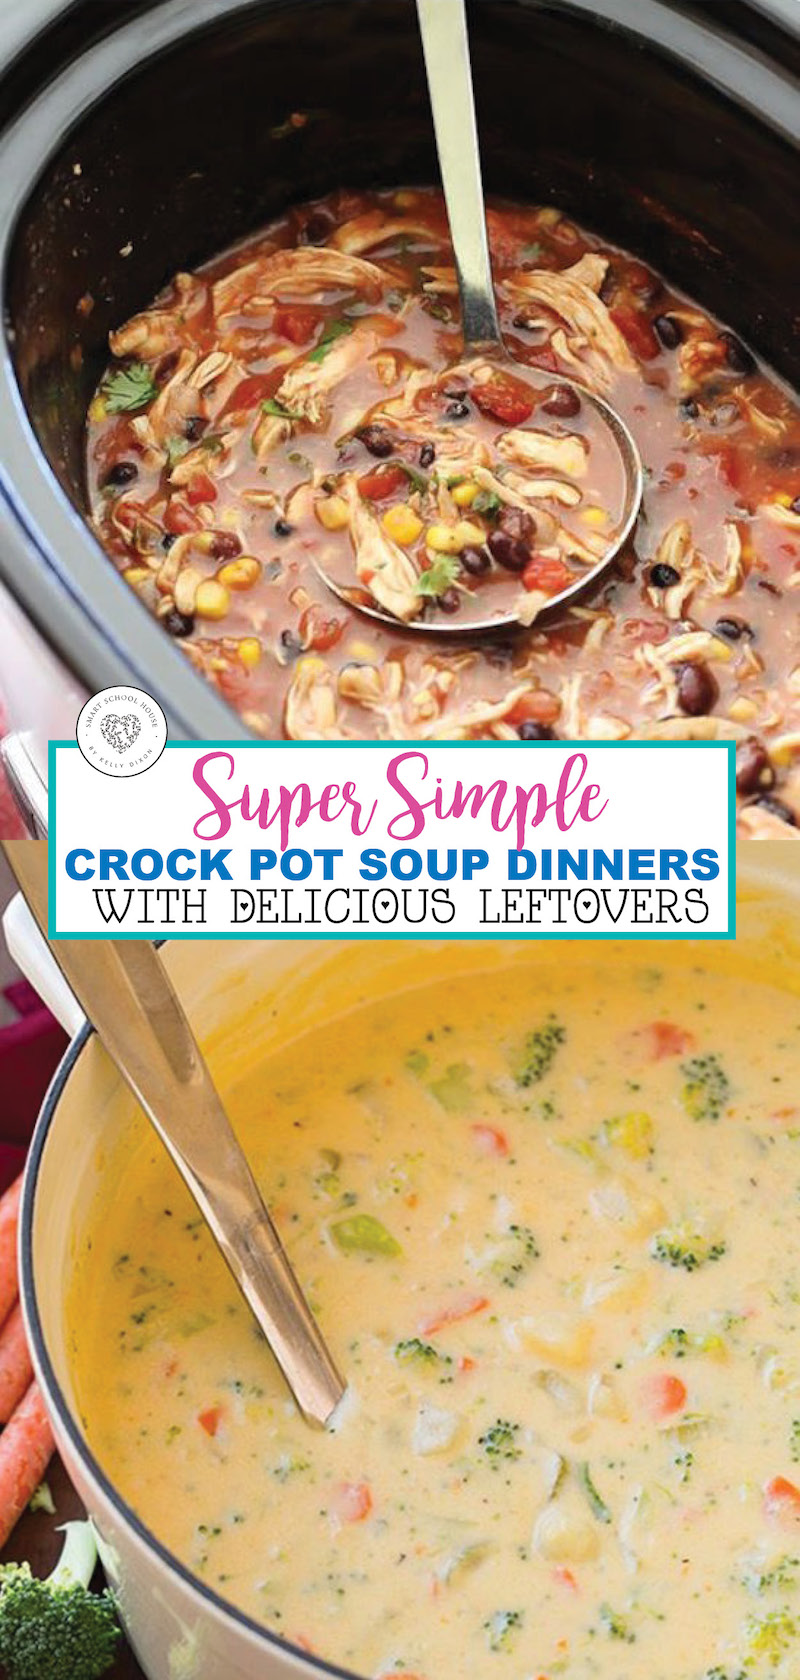 Crock Pot Soup Recipes Crock Pot and Slow Cooker Soup Recipes! Easy dinner ideas made in a crock pot. These are tried and true slow cooker soups that every crock pot lover should add to their collection!